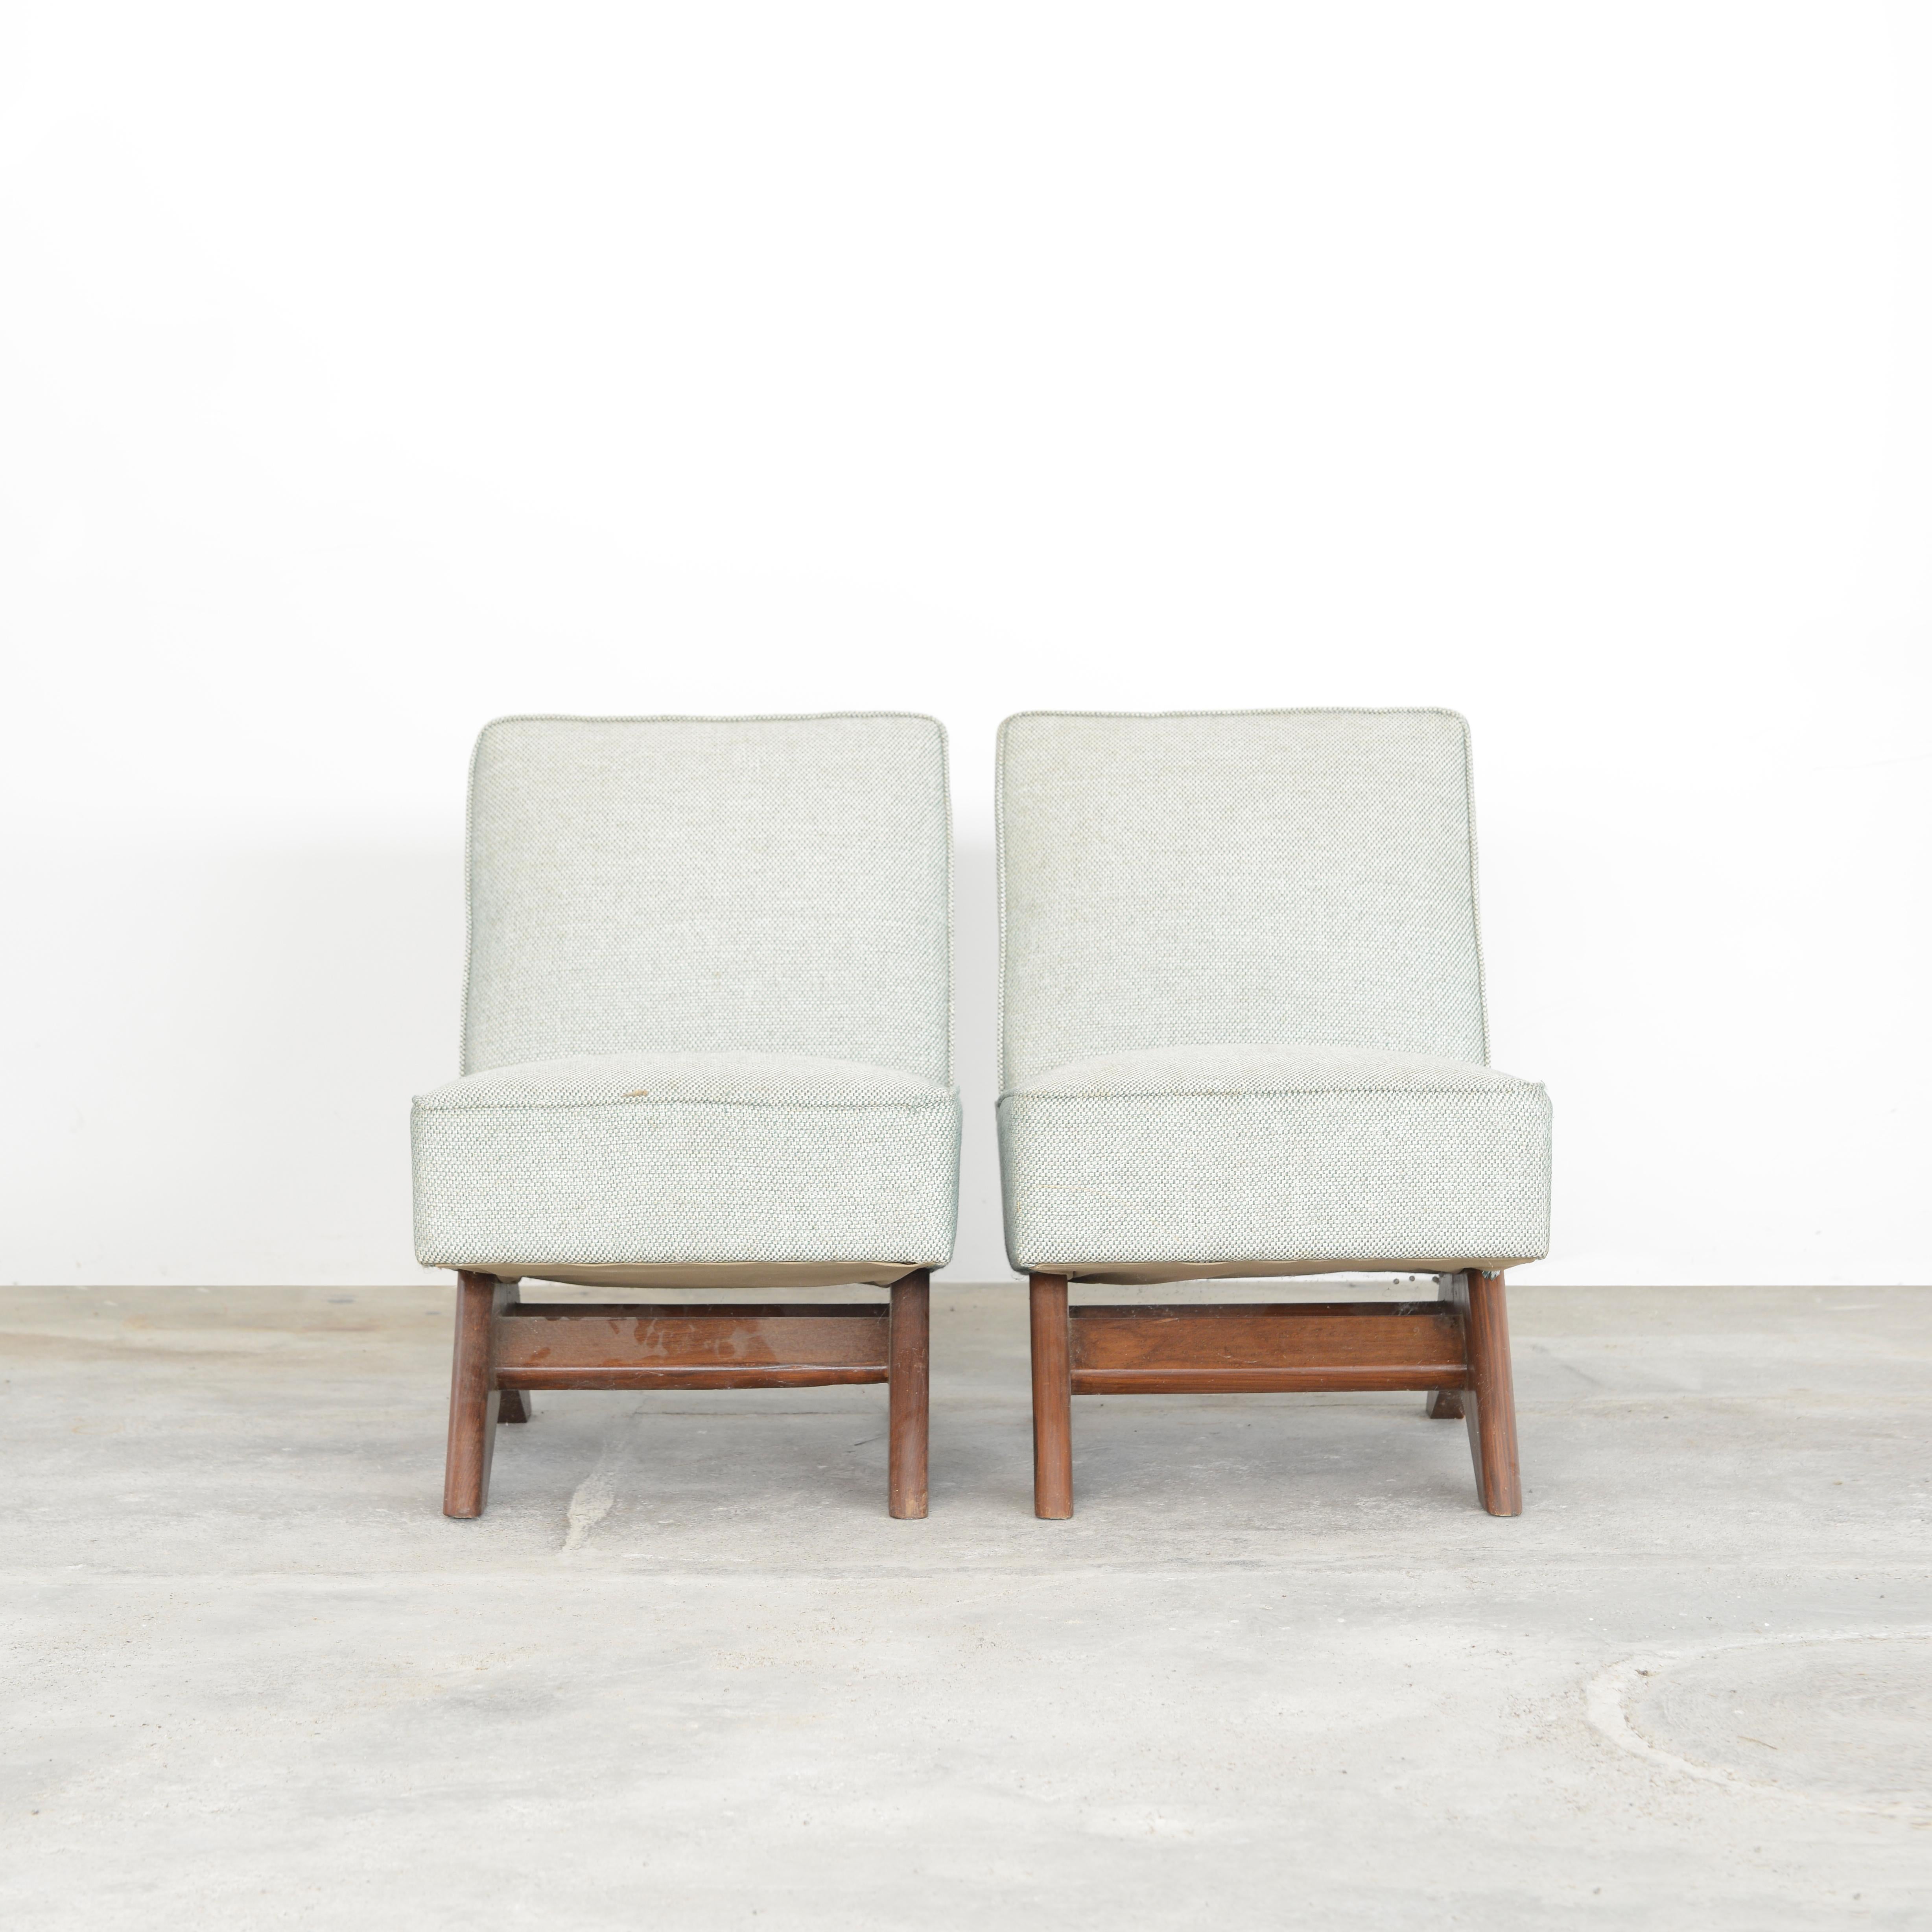 Hand-Crafted Two Pierre Jeanneret Sofa Chairs / Authentic Mid-Century Modern, Chandigarh For Sale